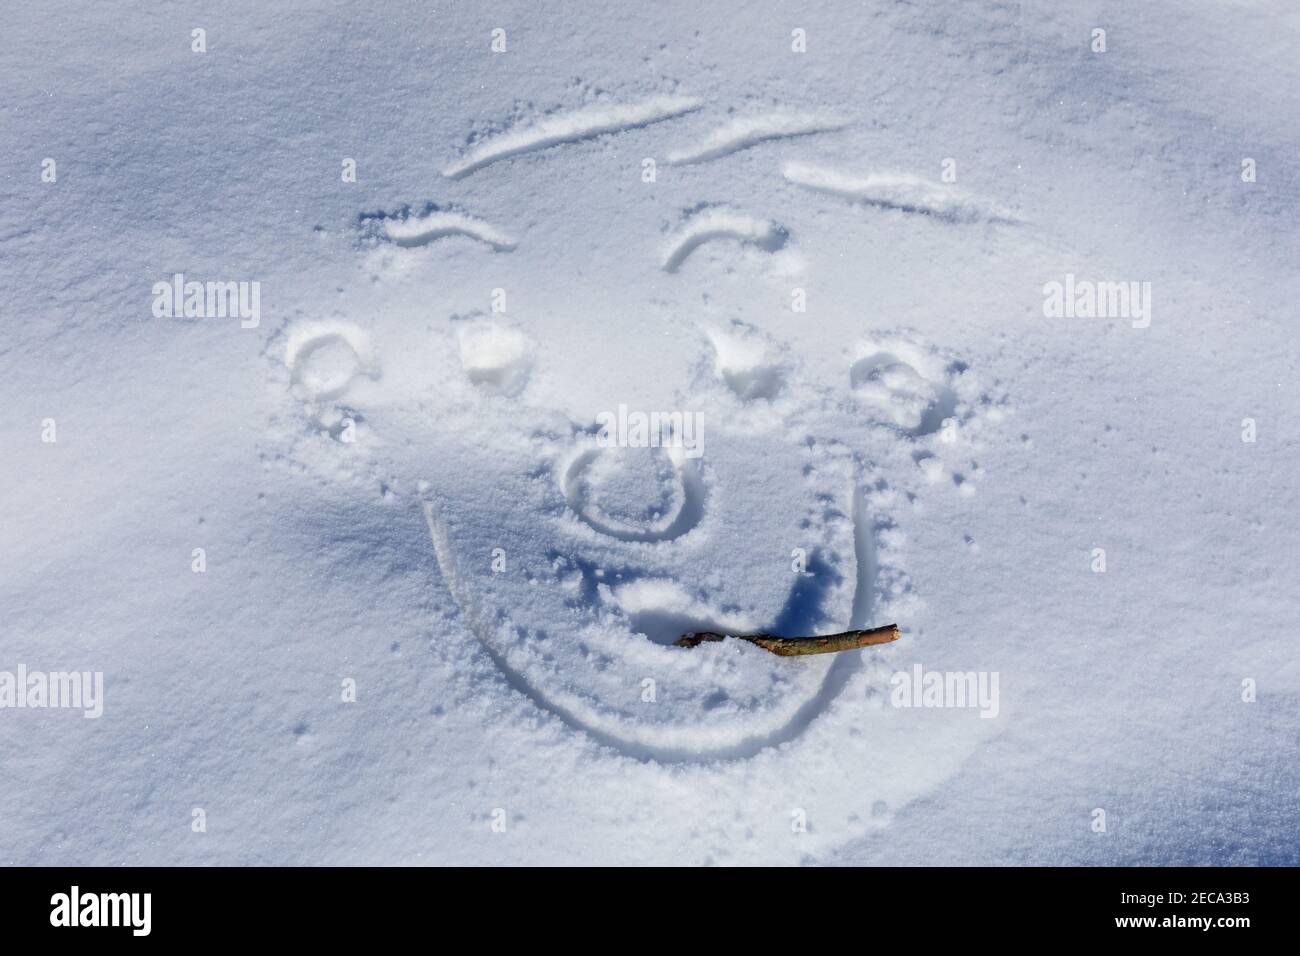 Westruper Heide Nature Reserve, NRW, Germany. 13th Feb, 2021. A cheeky face drawn into the snow. People have drawn little hearts, smileys and other messages for Valentine's Day tomorrow in the snow. Many walkers are out in the beautiful sunshine whilst the heather plants at Westruper Heide are still covered in snow. Credit: Imageplotter/Alamy Live News Stock Photo